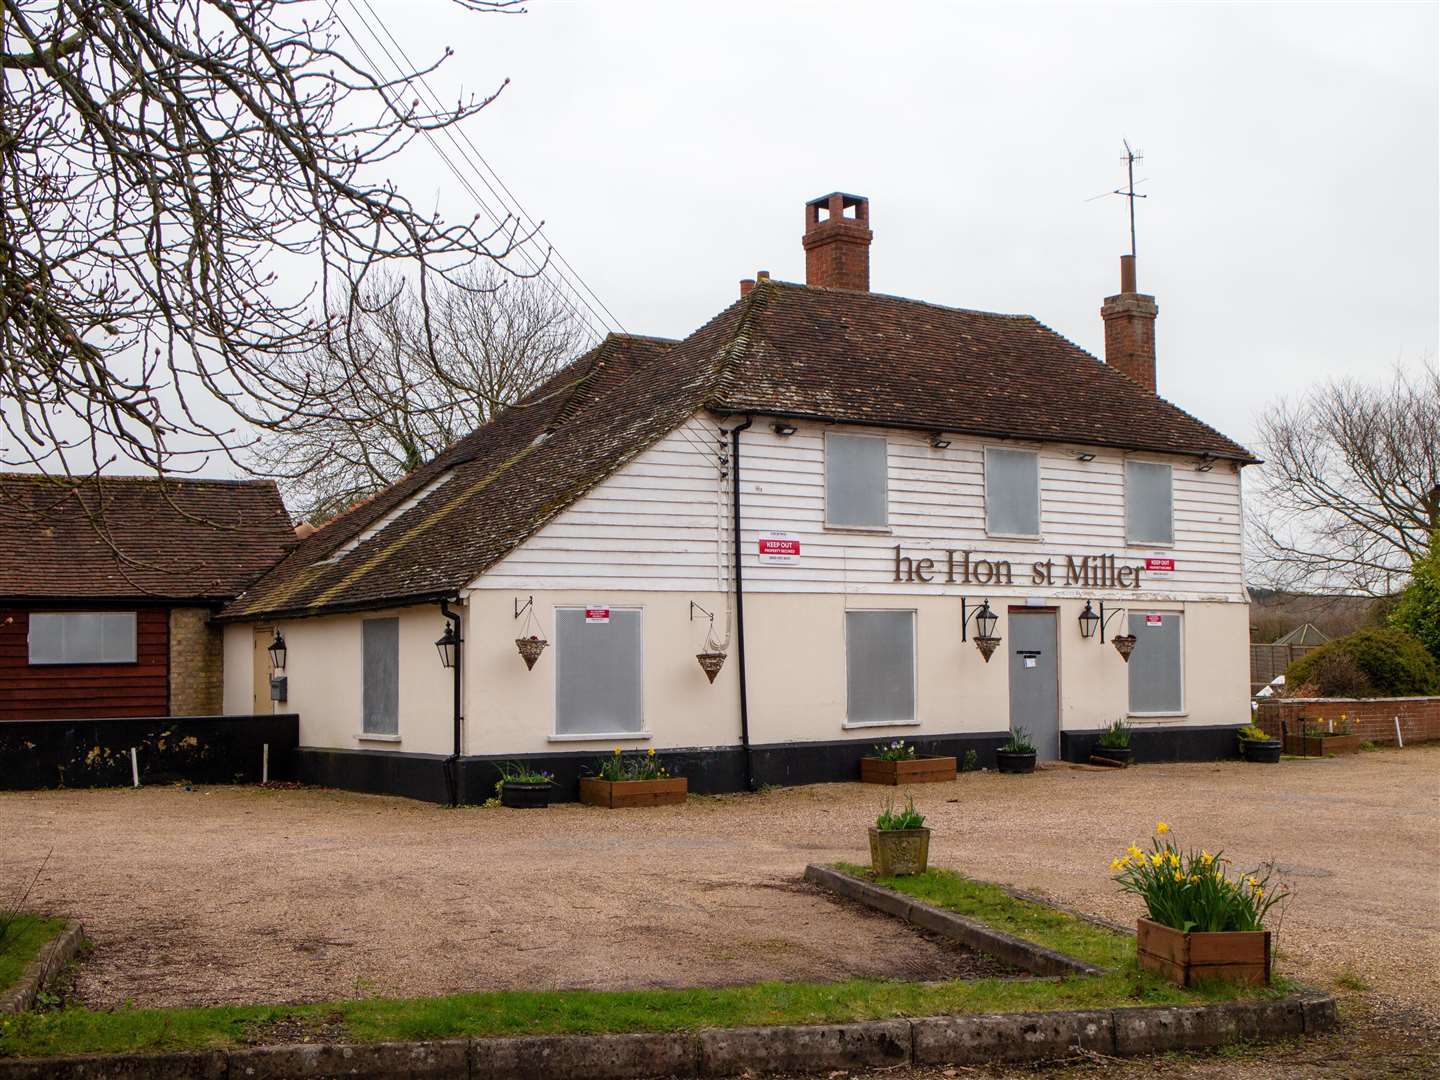 The Honest Miller in Brook is on the market for less than £500,000 with more than an acre of land